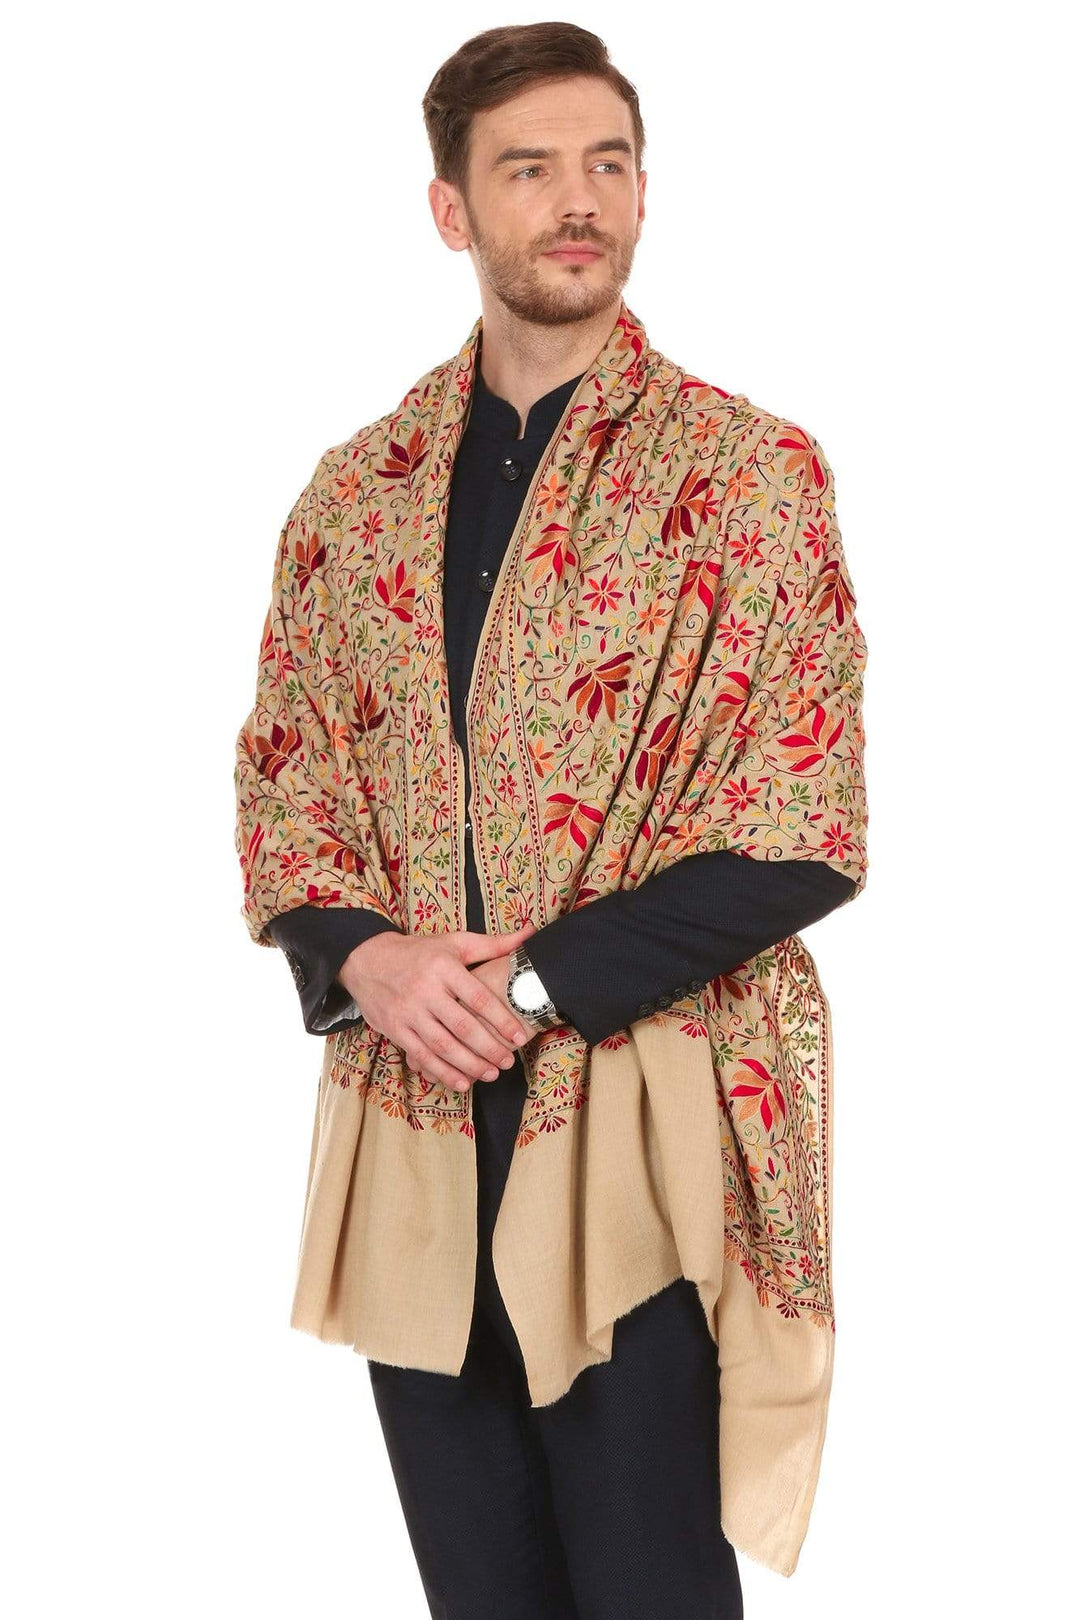 Pashtush Mens Hand Embroidered Stole, Ethnic Wrap, 100% Pure Wool